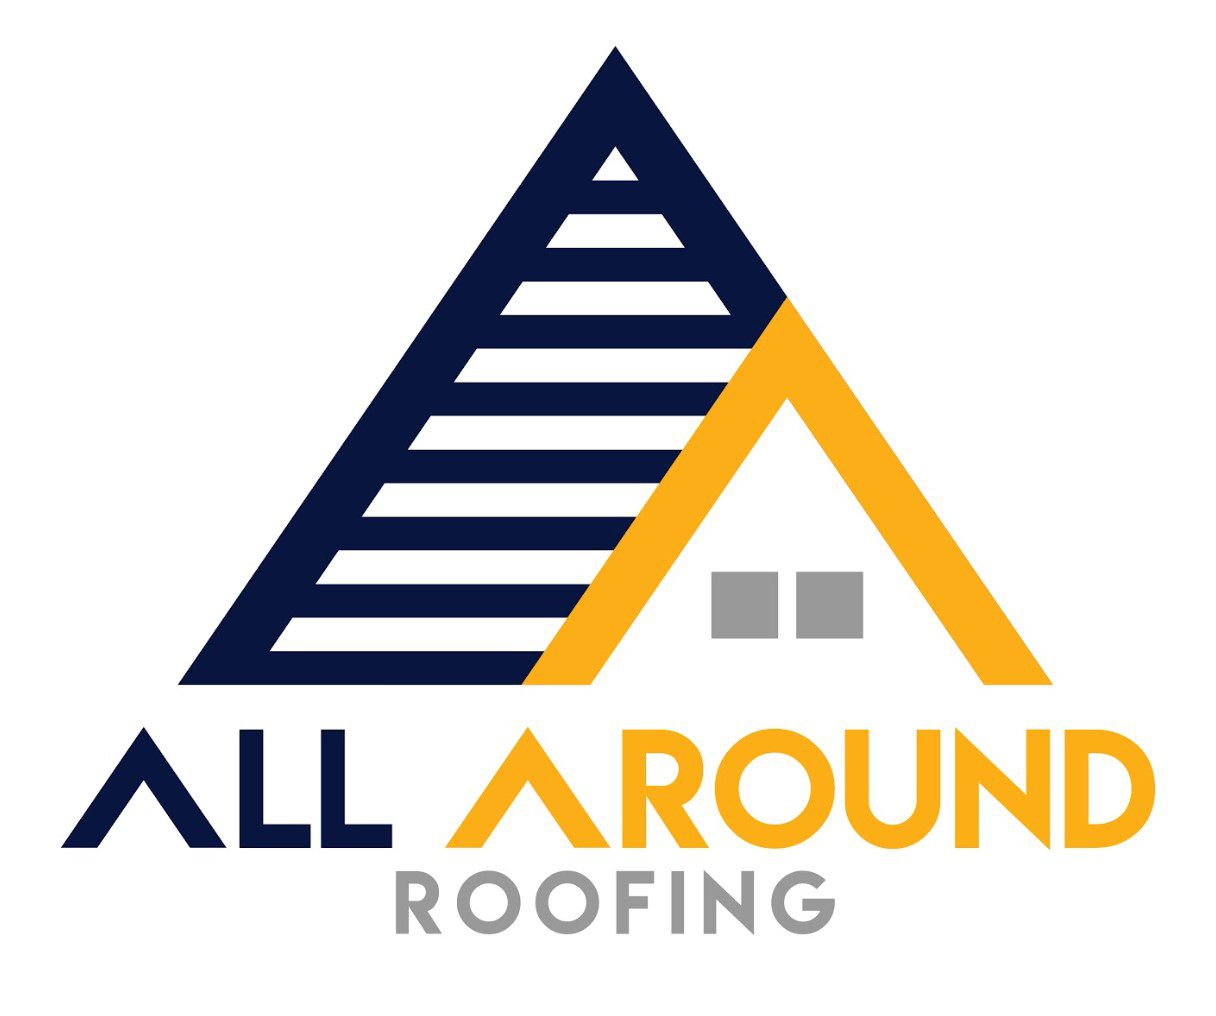 All Around Roofing